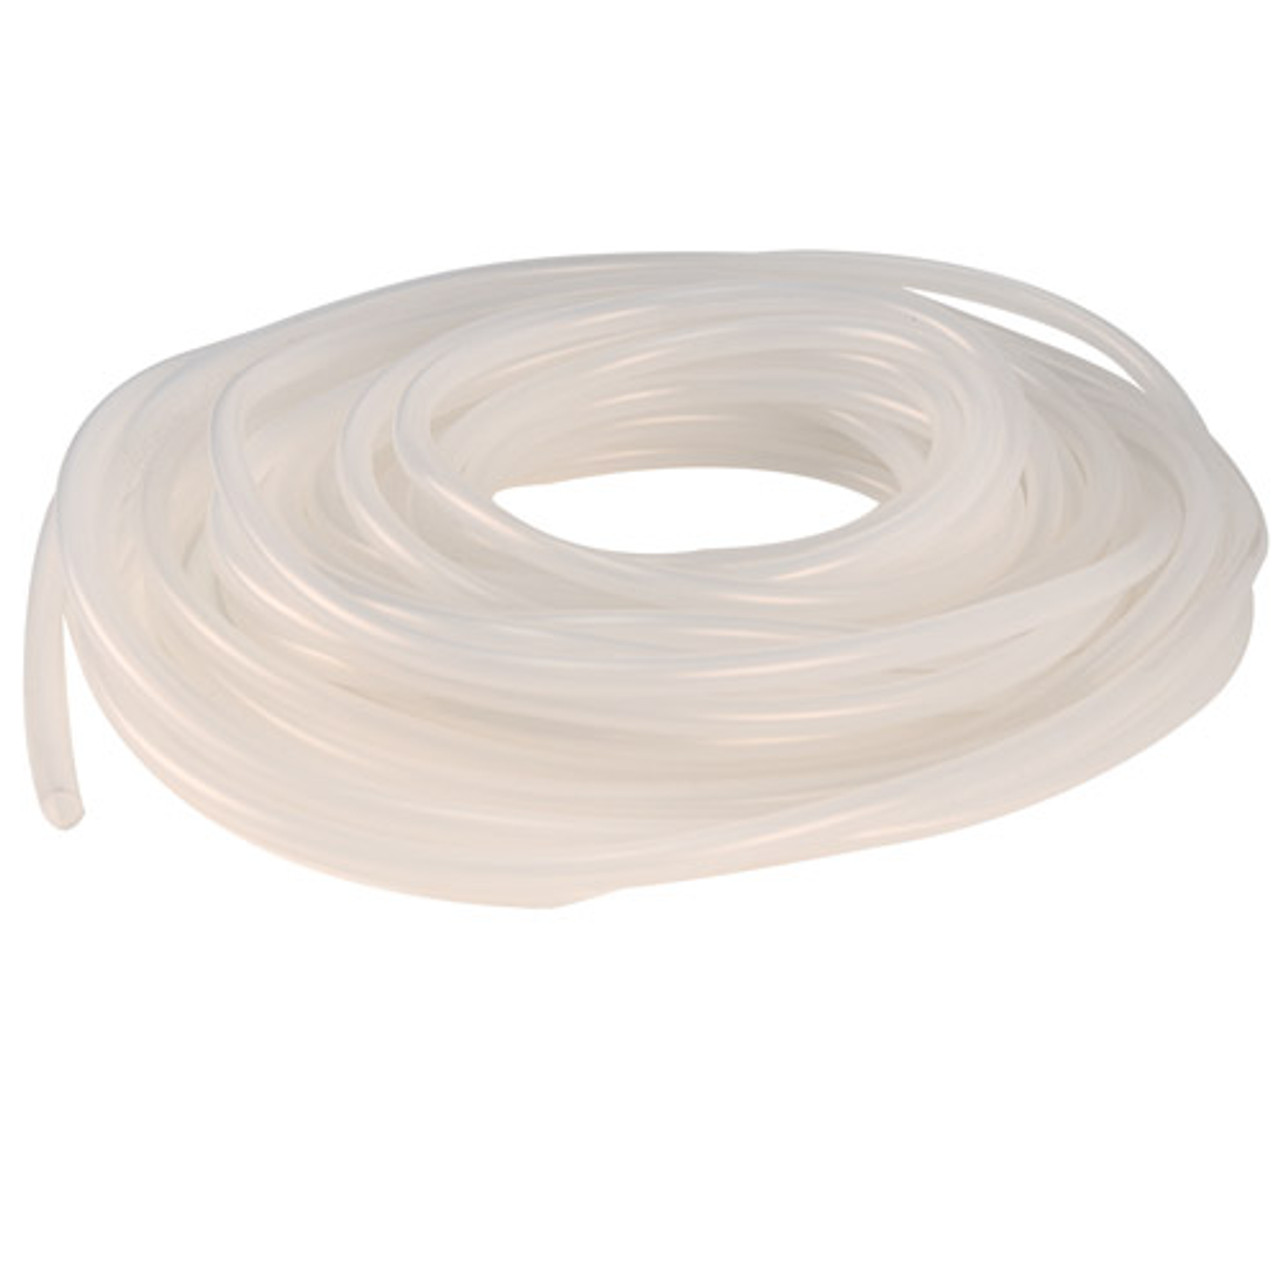 Ultra Soft Silicone Tubing: Silicone, 5/16 in ID, 7/16 in OD, 25 ft Lg,  White, Not Reinforced